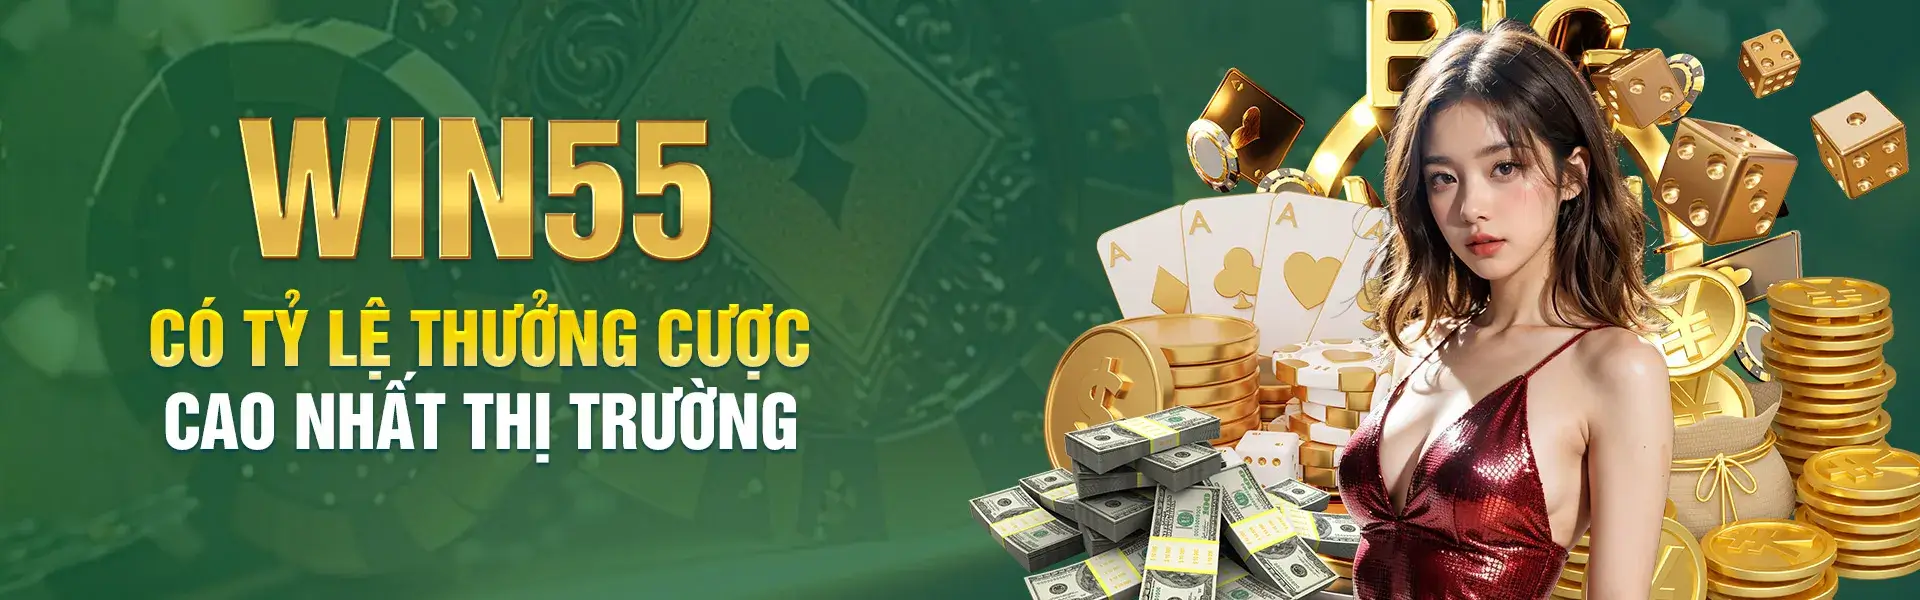 Win55-co-ty-le-thuong-cuoc-cao-nhat-thi-truong